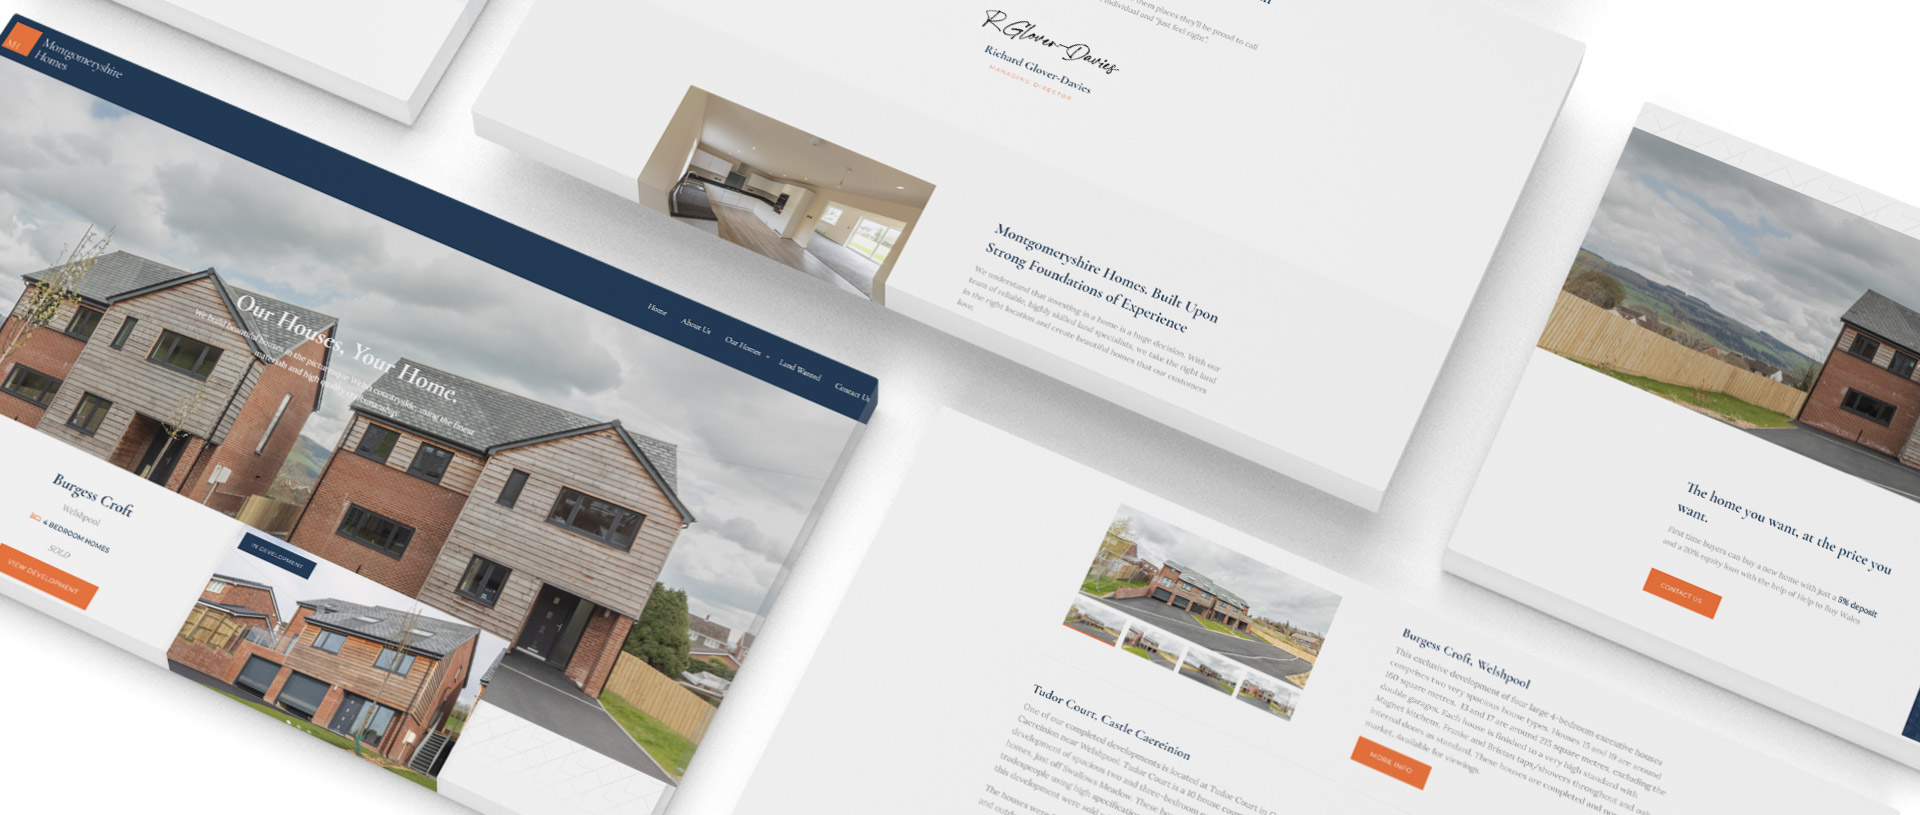 Montgomeryshire Homes Property Development Web Design pages displayed out on a flat surface